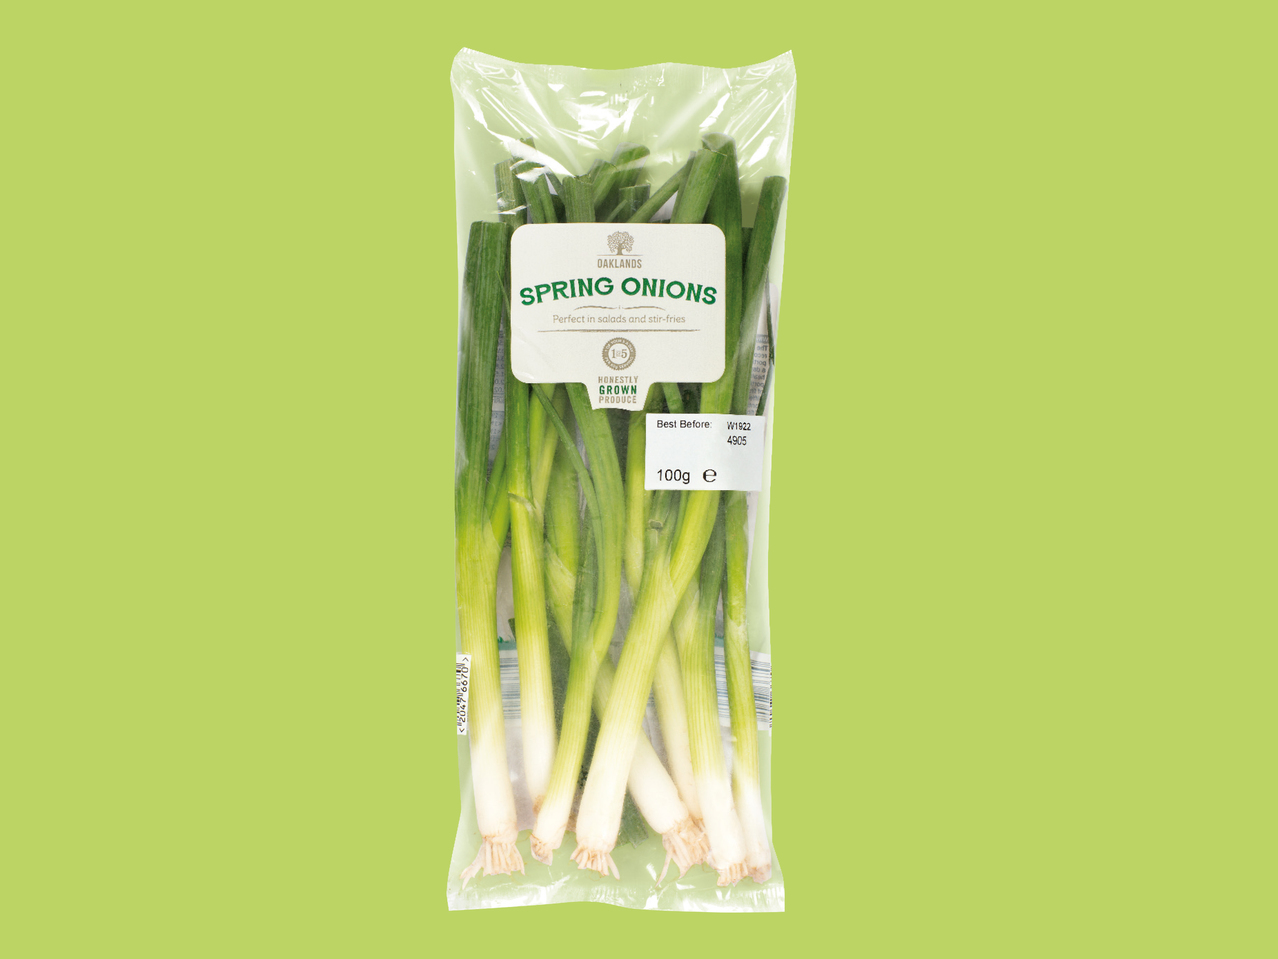 Oaklands Spring Onions1